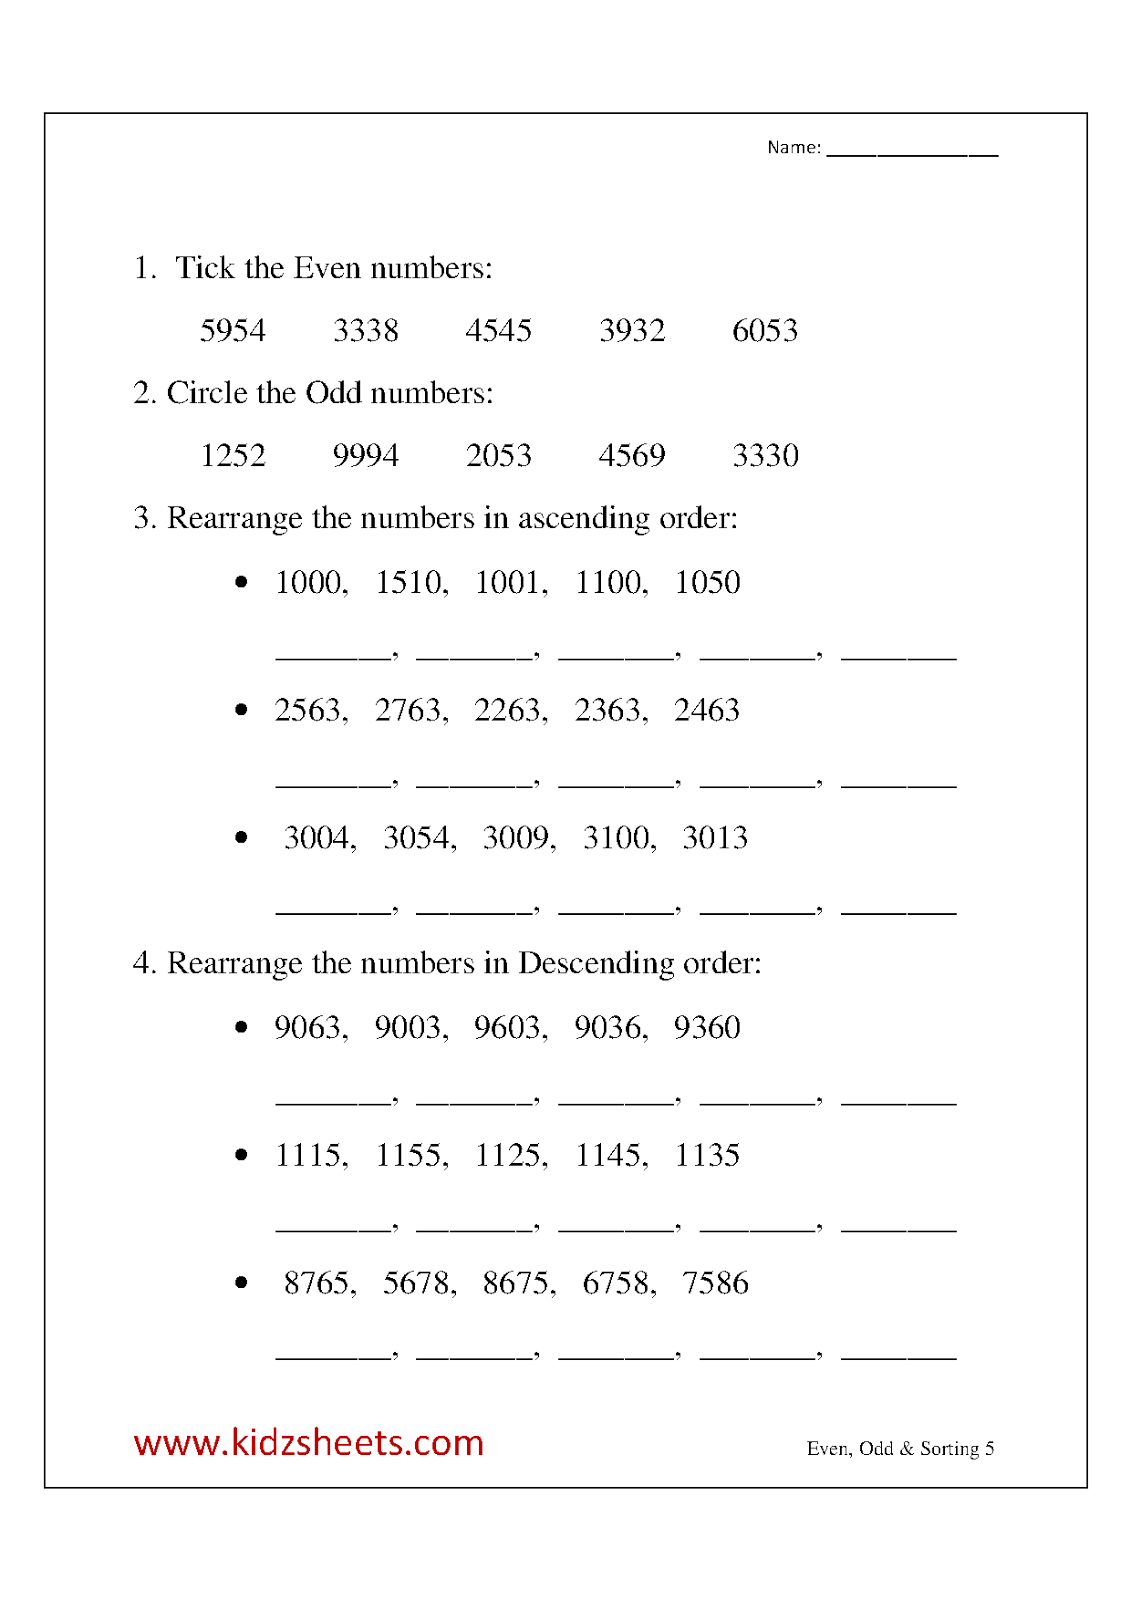 12-best-images-of-odd-and-even-numbers-worksheets-odd-even-numbers